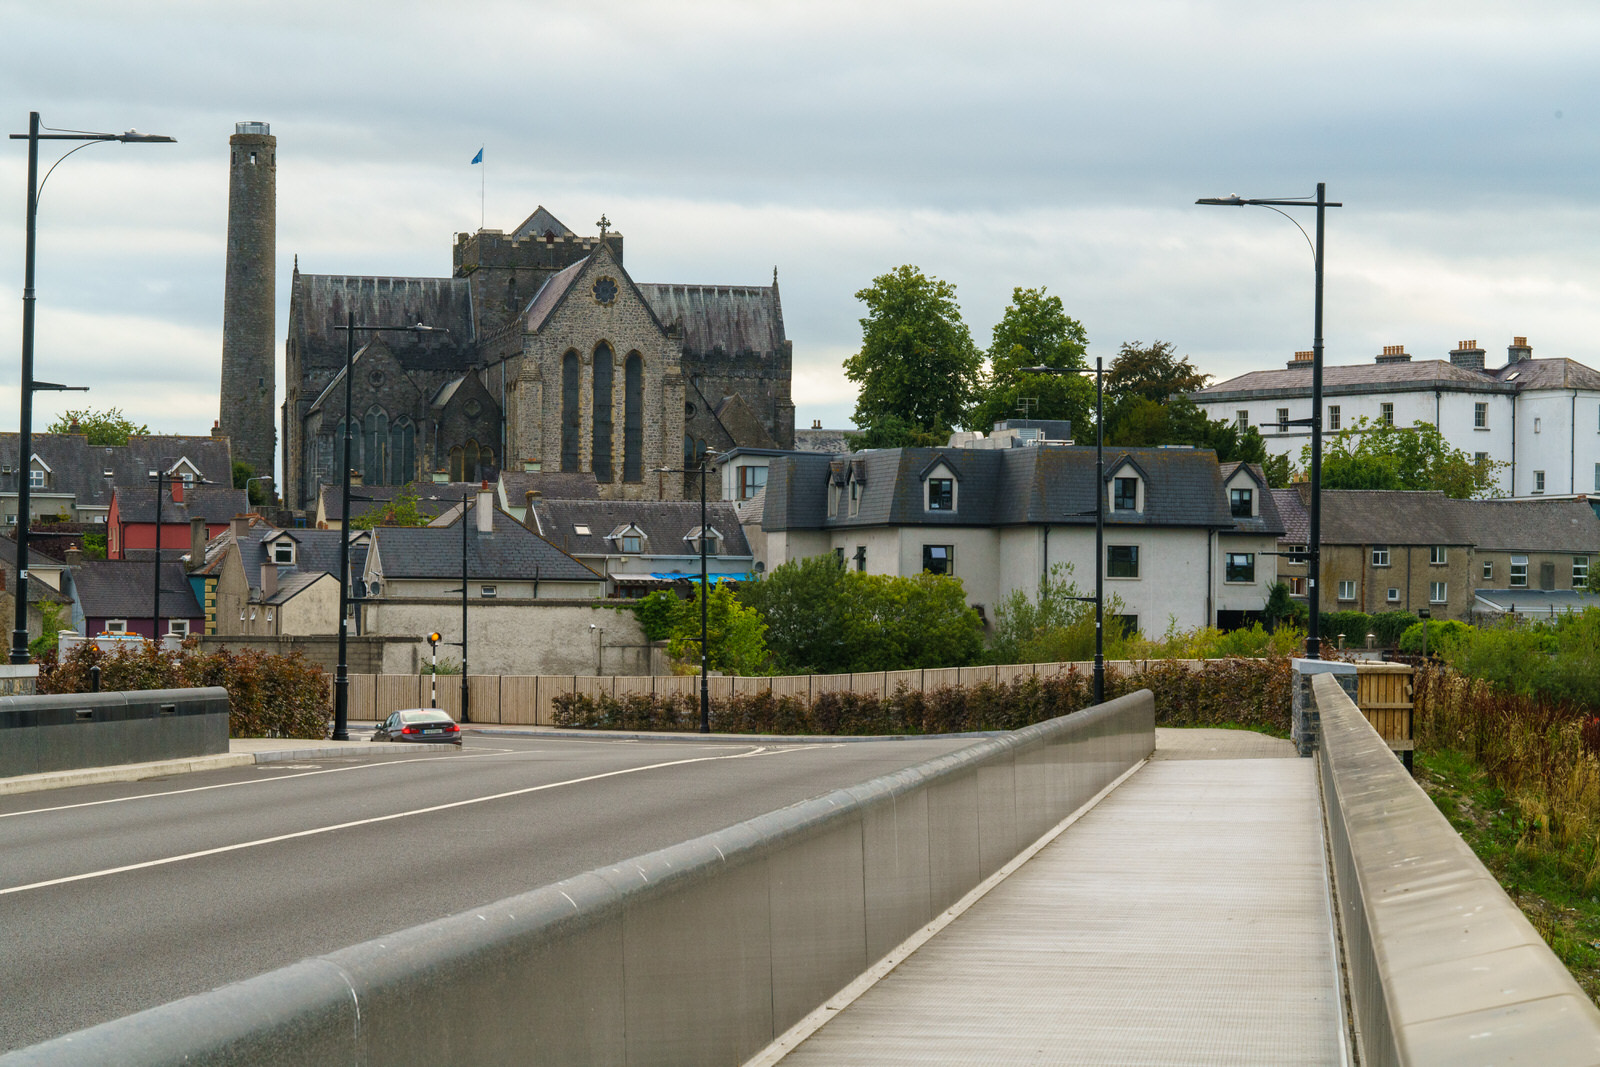 THE NEW ST FRANCIS BRIDGE IN KILKENNY AND THE SURROUNDING AREA [OPENED TO THE PUBLIC IN 2017]-227045-1